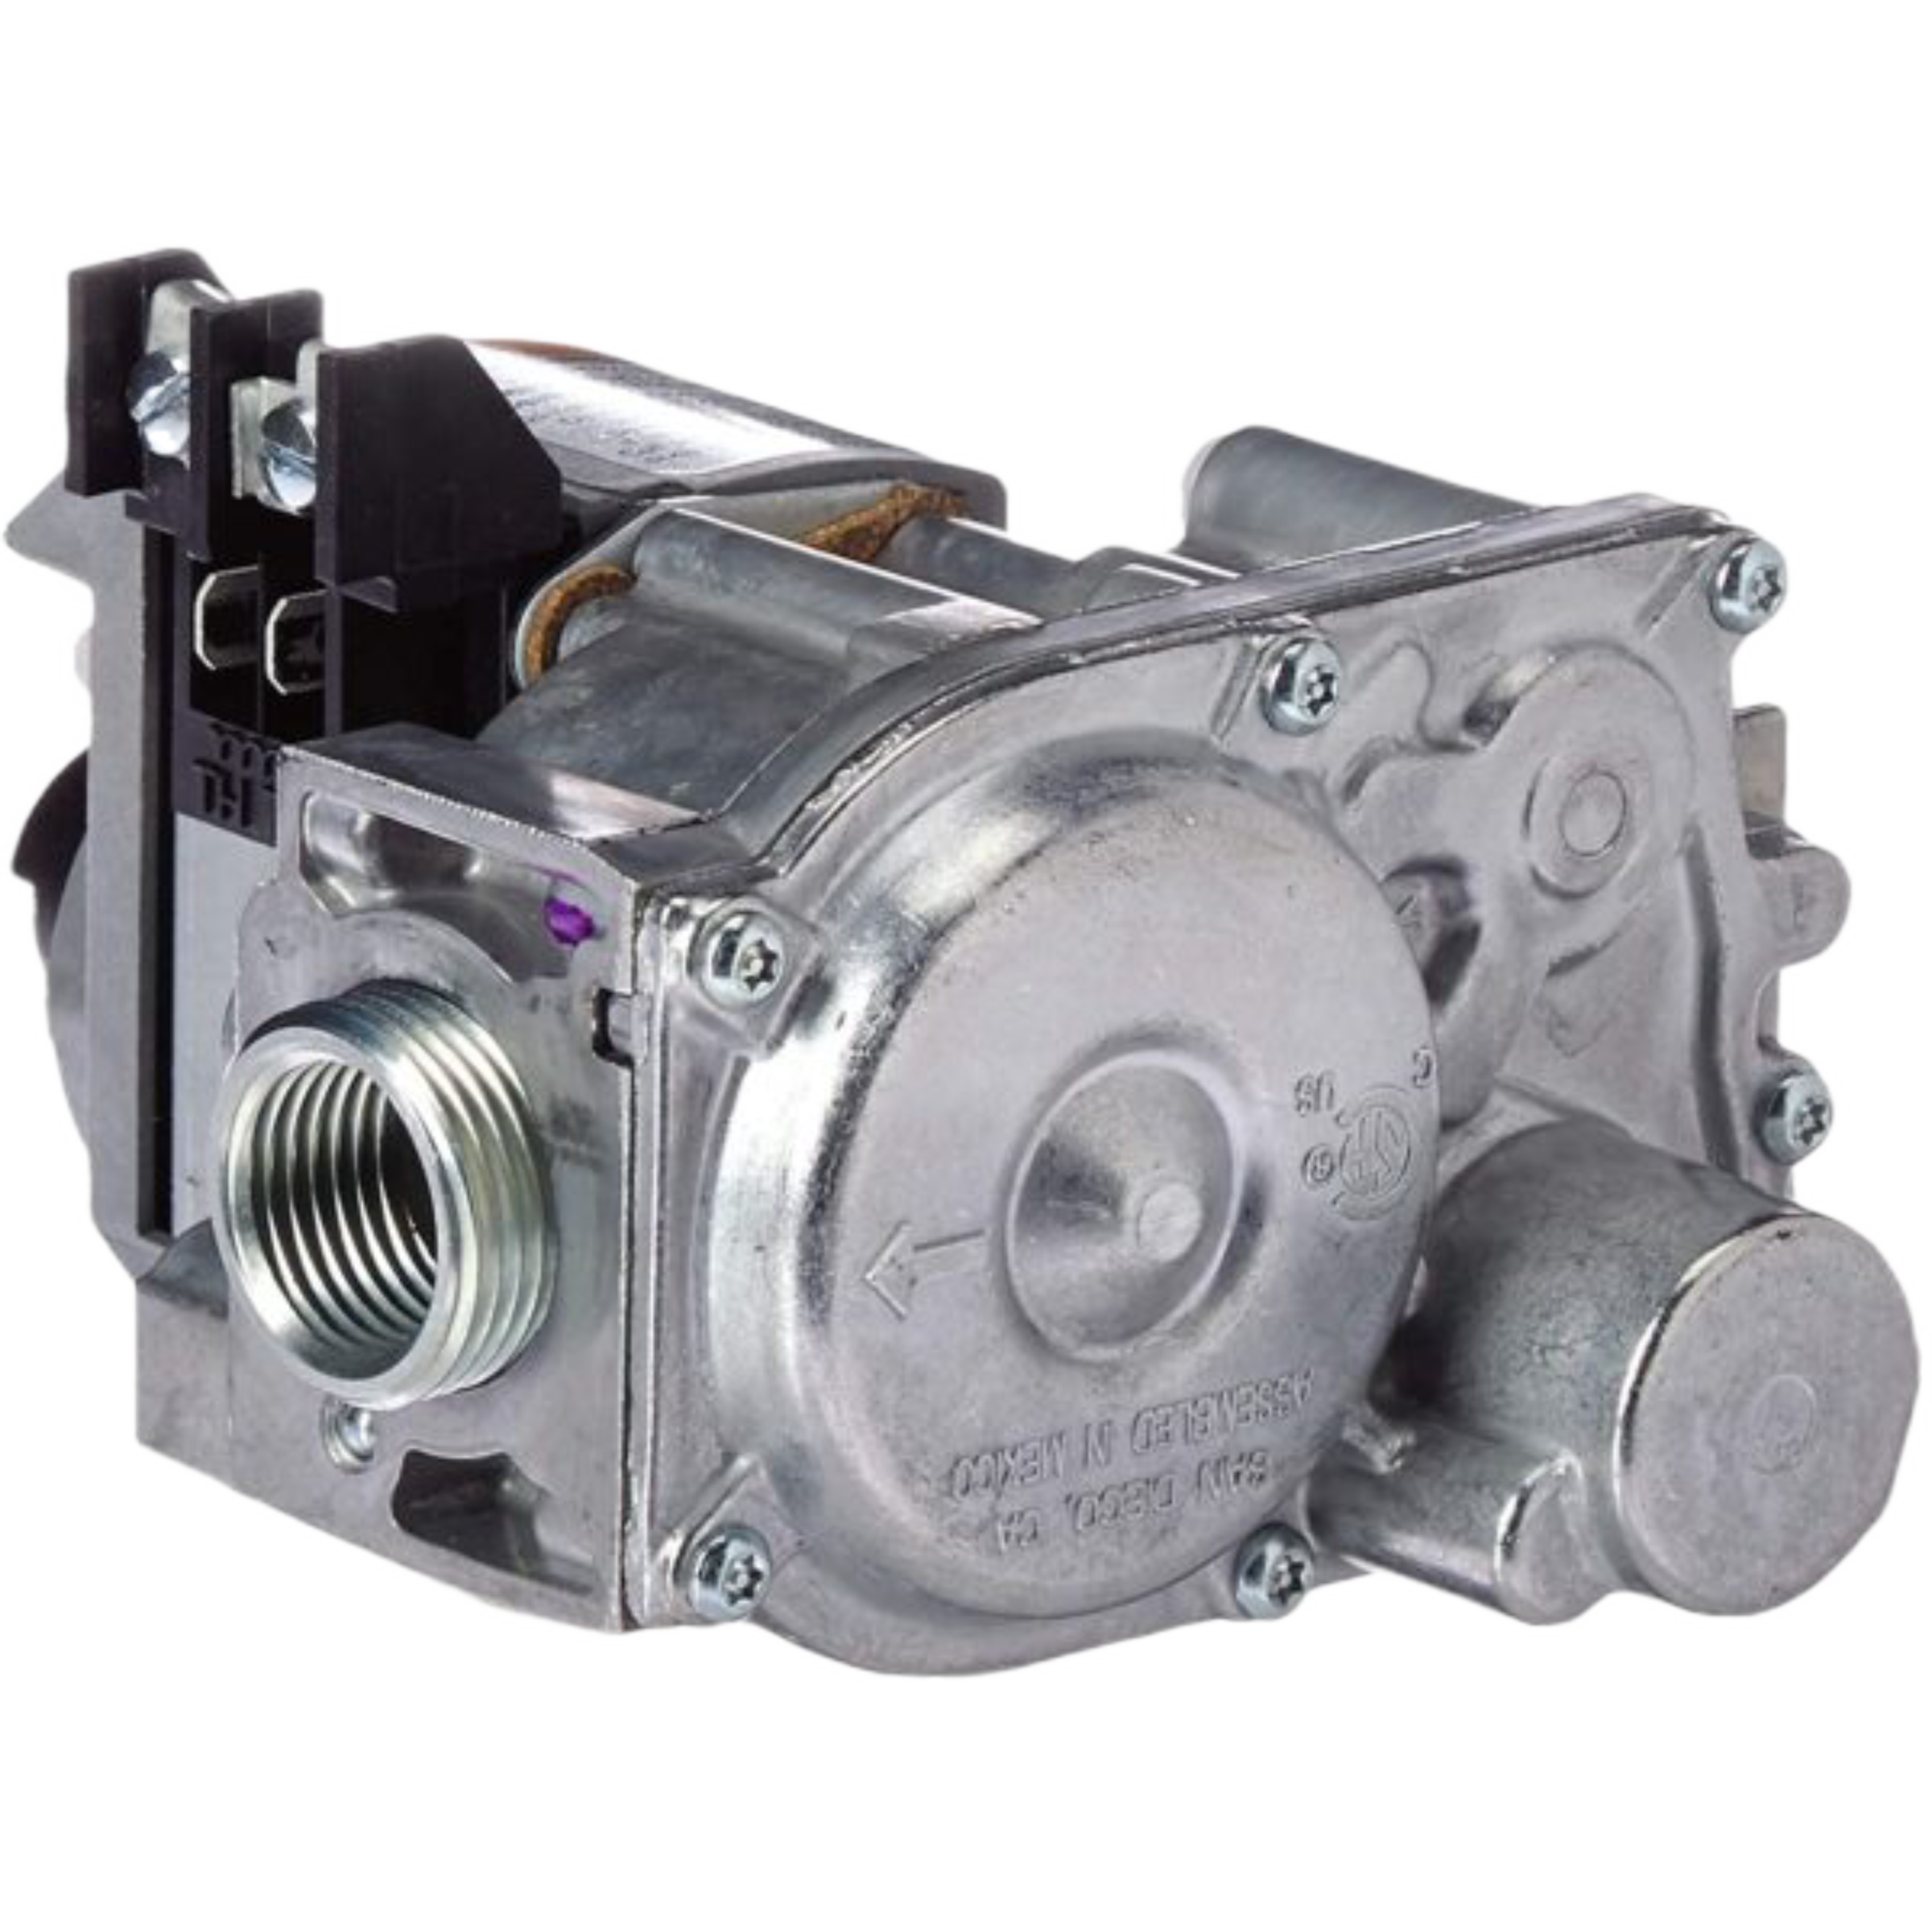 VR8300A3500 Honeywell Home Standing Pilot Gas Valve, Standard Opening, 24 VAC Single Stage, Max. Capacity 290,000BTUh